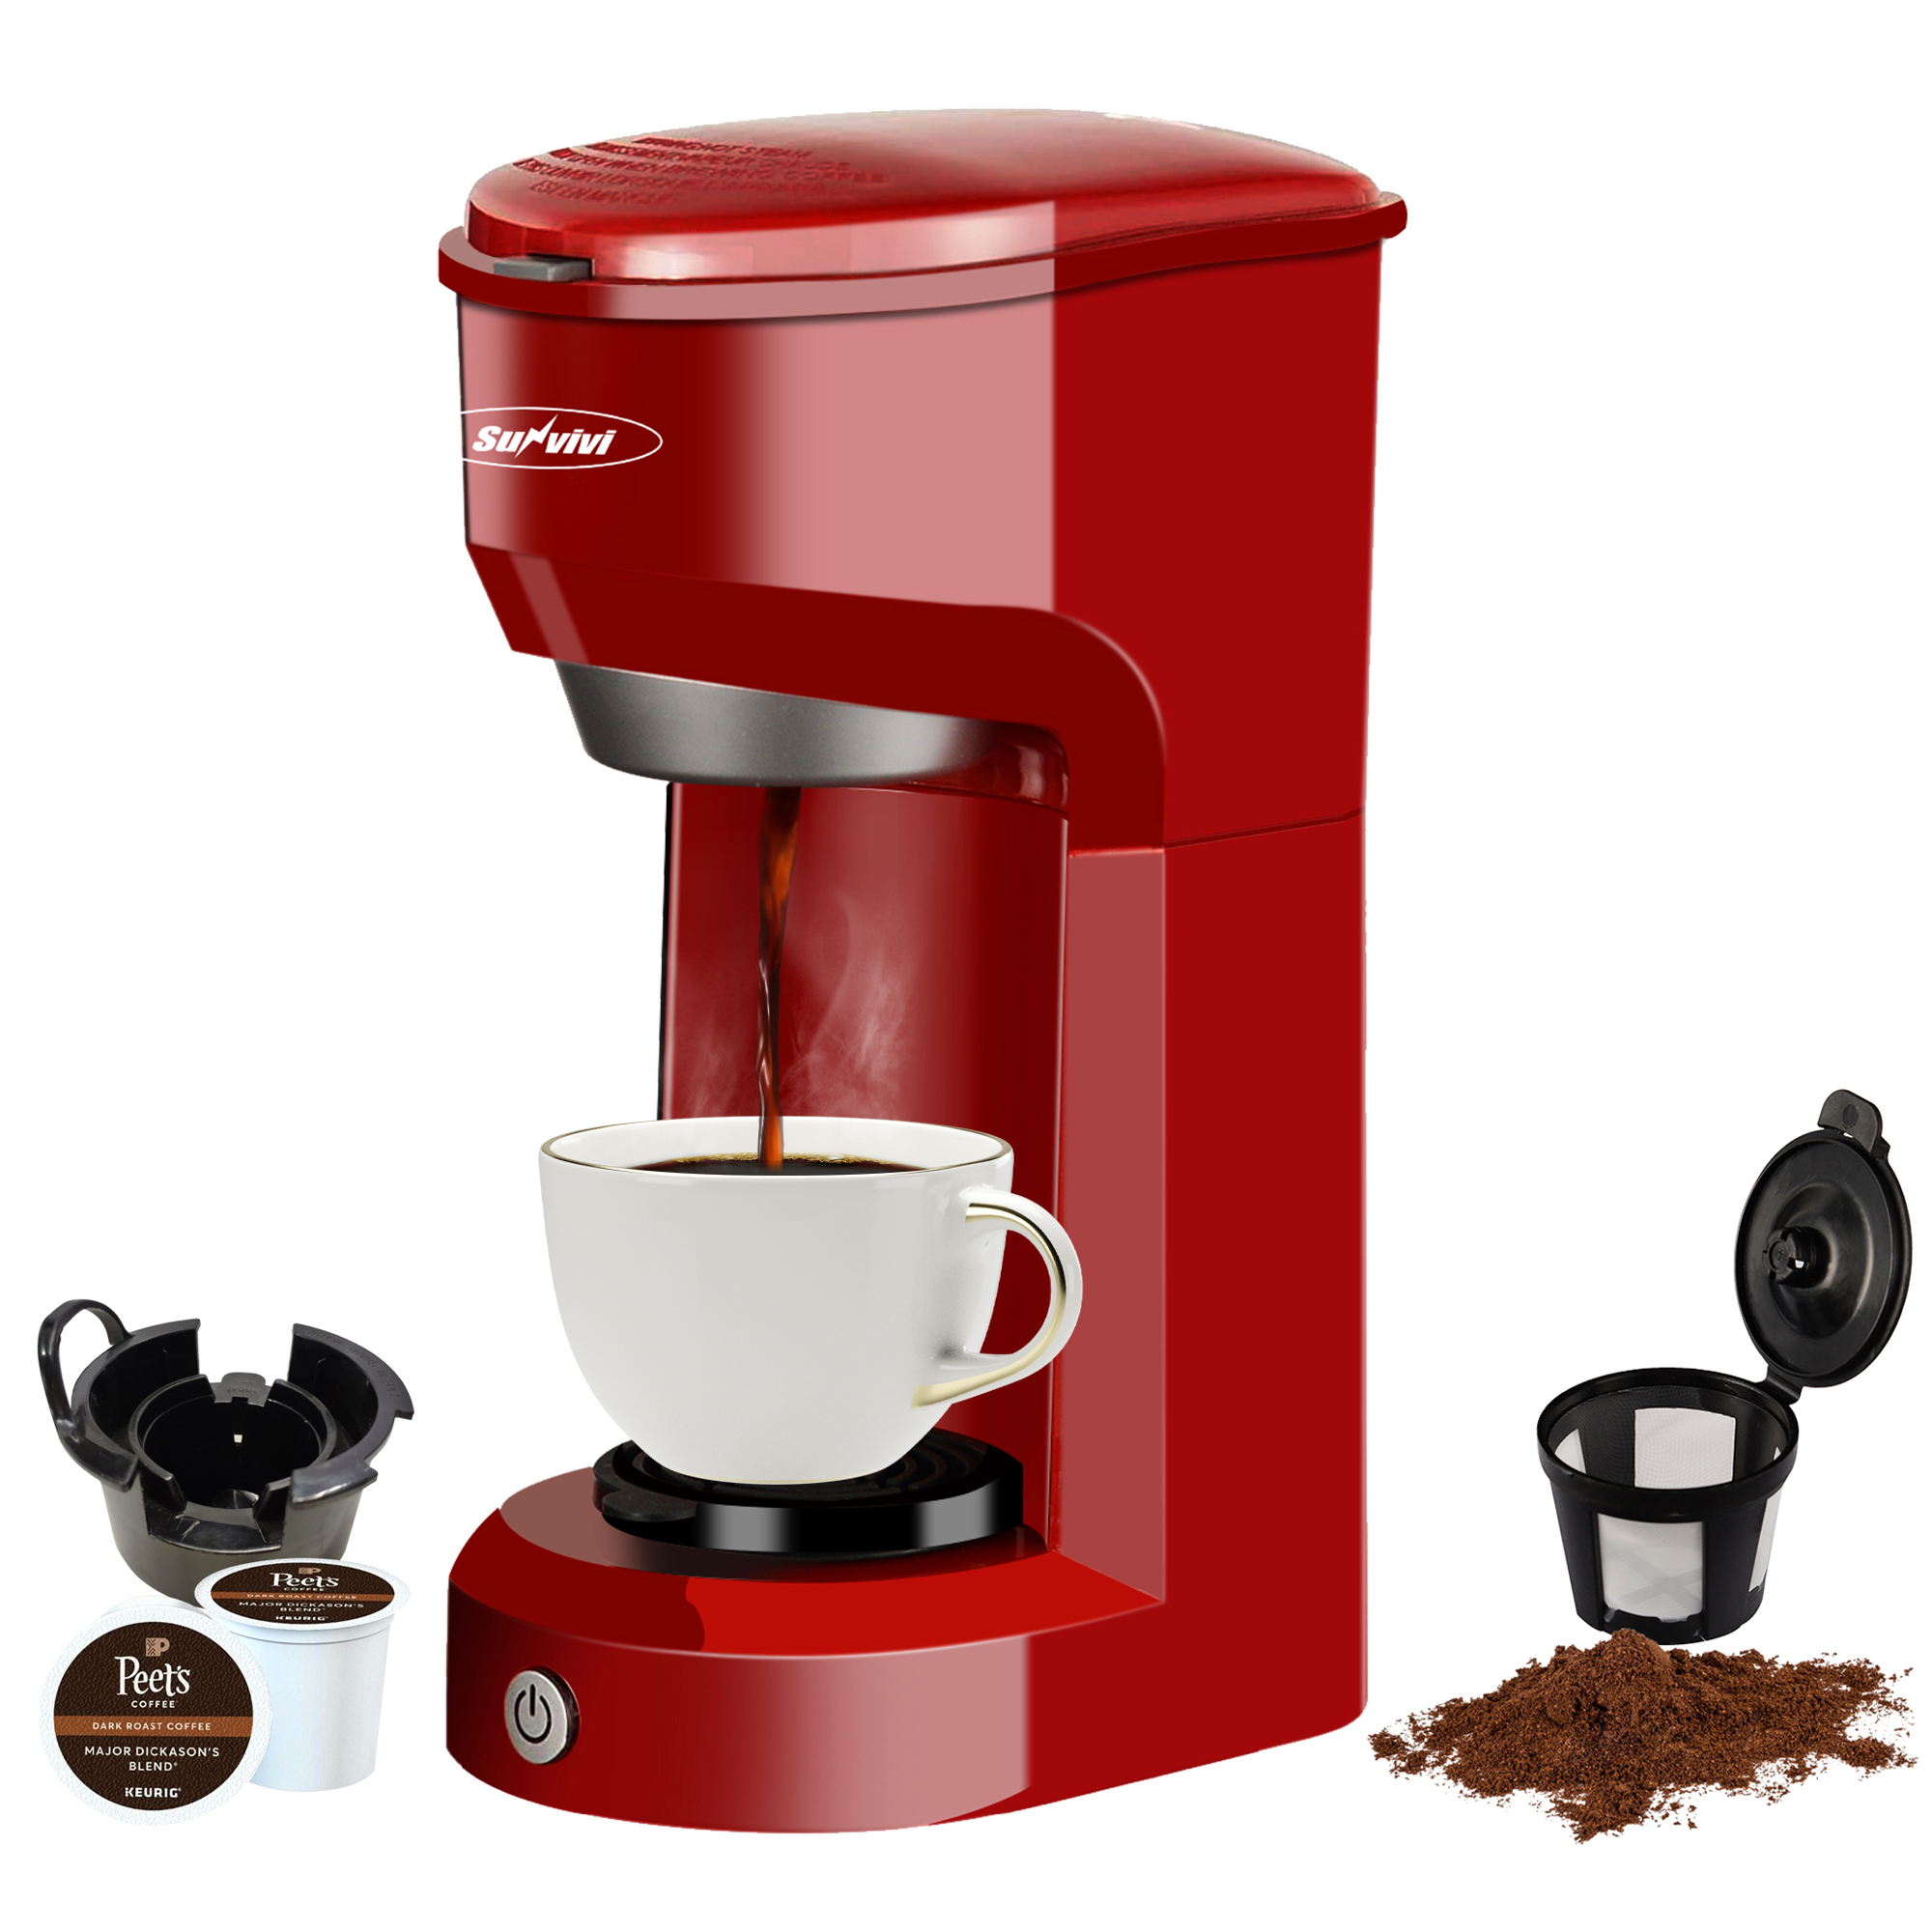 Single Serve Coffee Maker Brewer for Single Cup, K-Cup Coffeemaker with Permanent Filter, 6oz to 14oz Mug, One-Touch Control Button with Illumination, Red - image 1 of 9